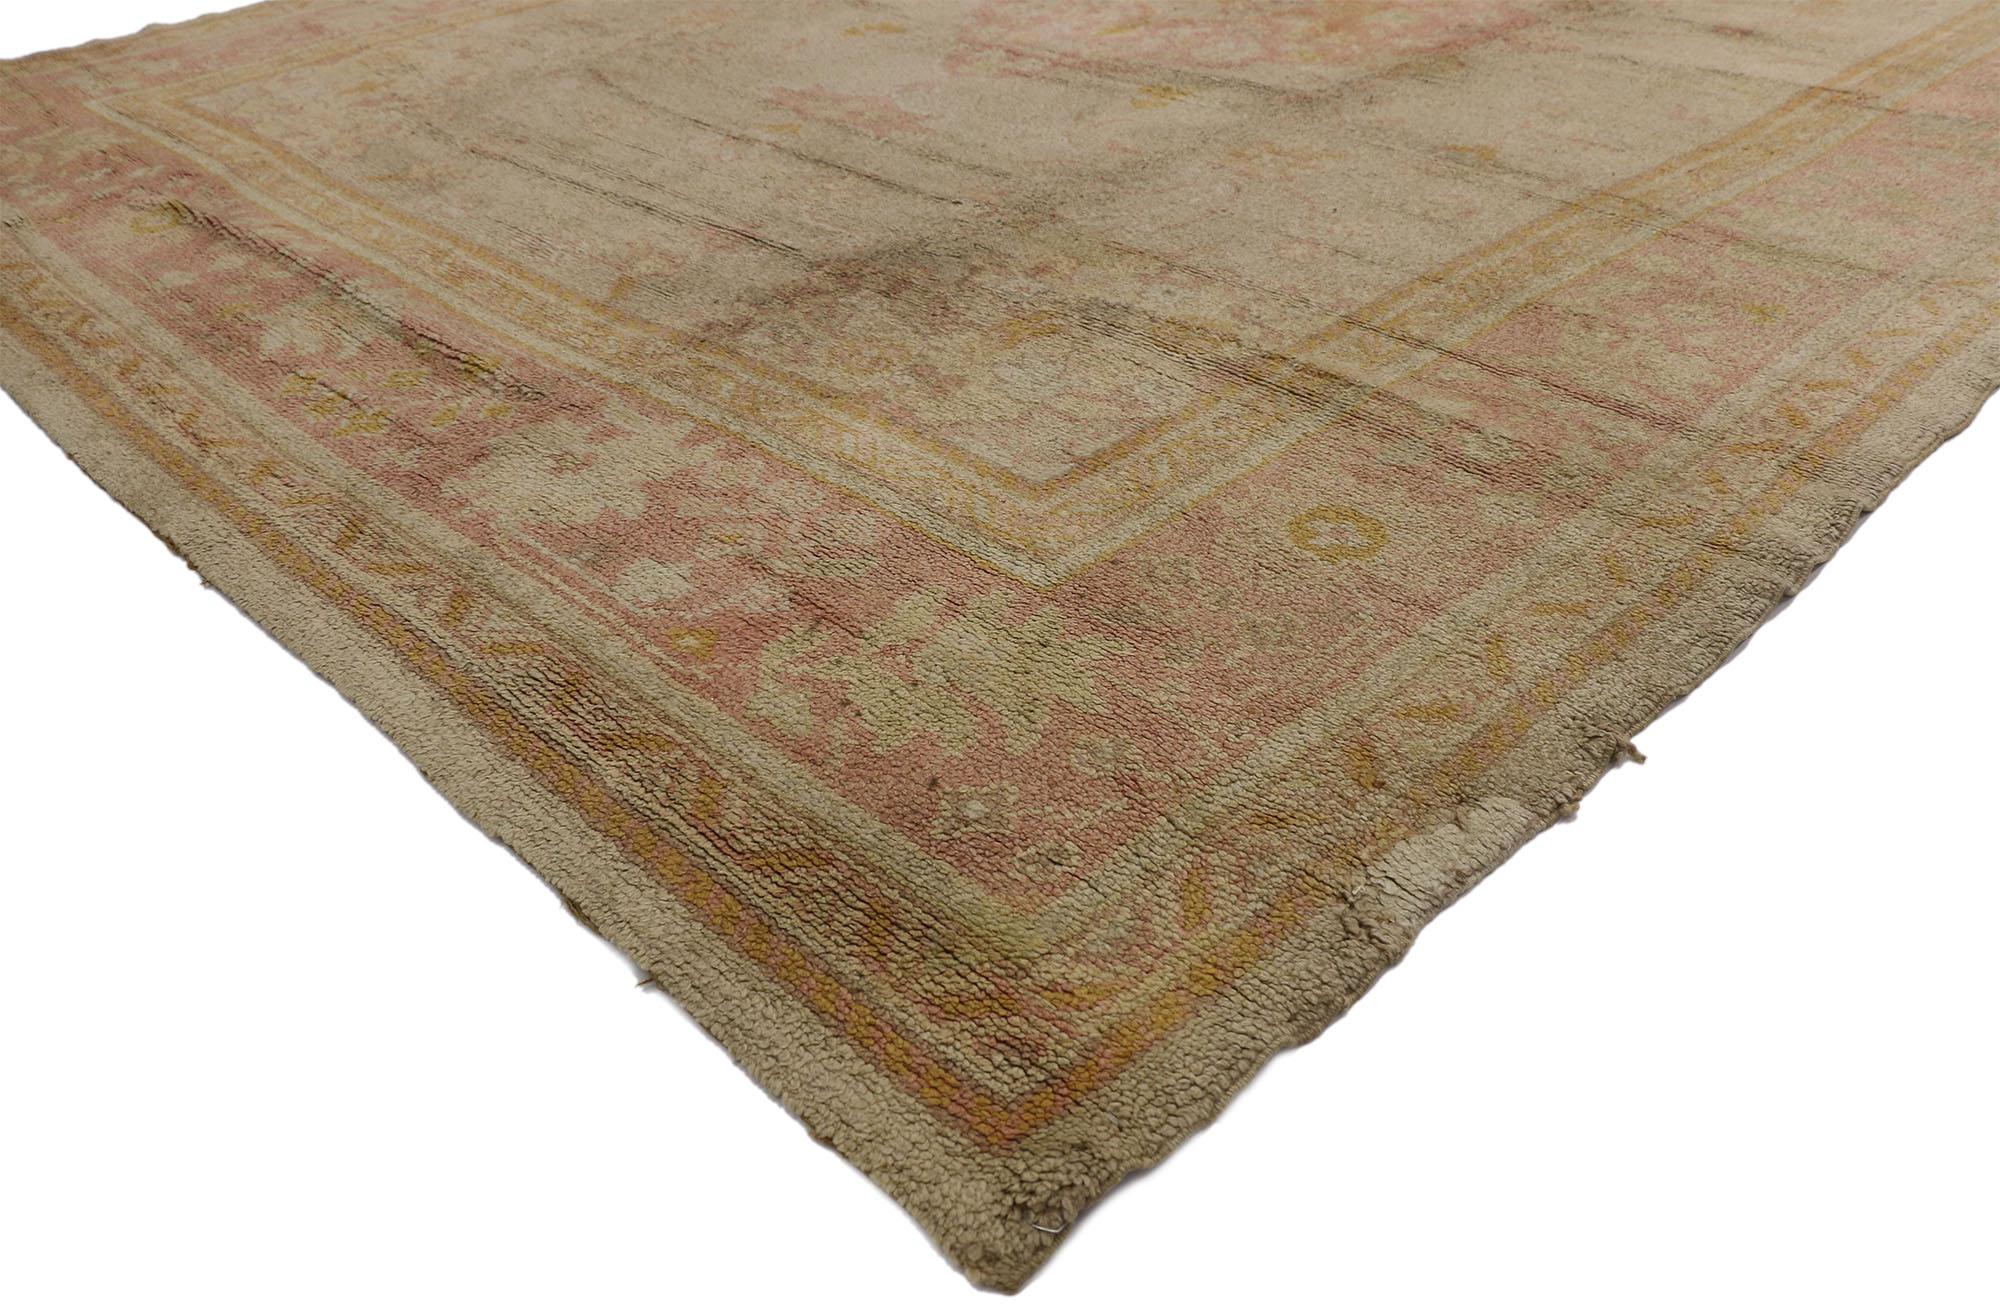 74018 Antique European Oushak Rug, 09'07 x 13'02. Antique-washed European Oushak rugs are distinguished by their naturally soft, faded colors, achieved through a special washing process maintaining the rug's fibers and structure. Originating from or